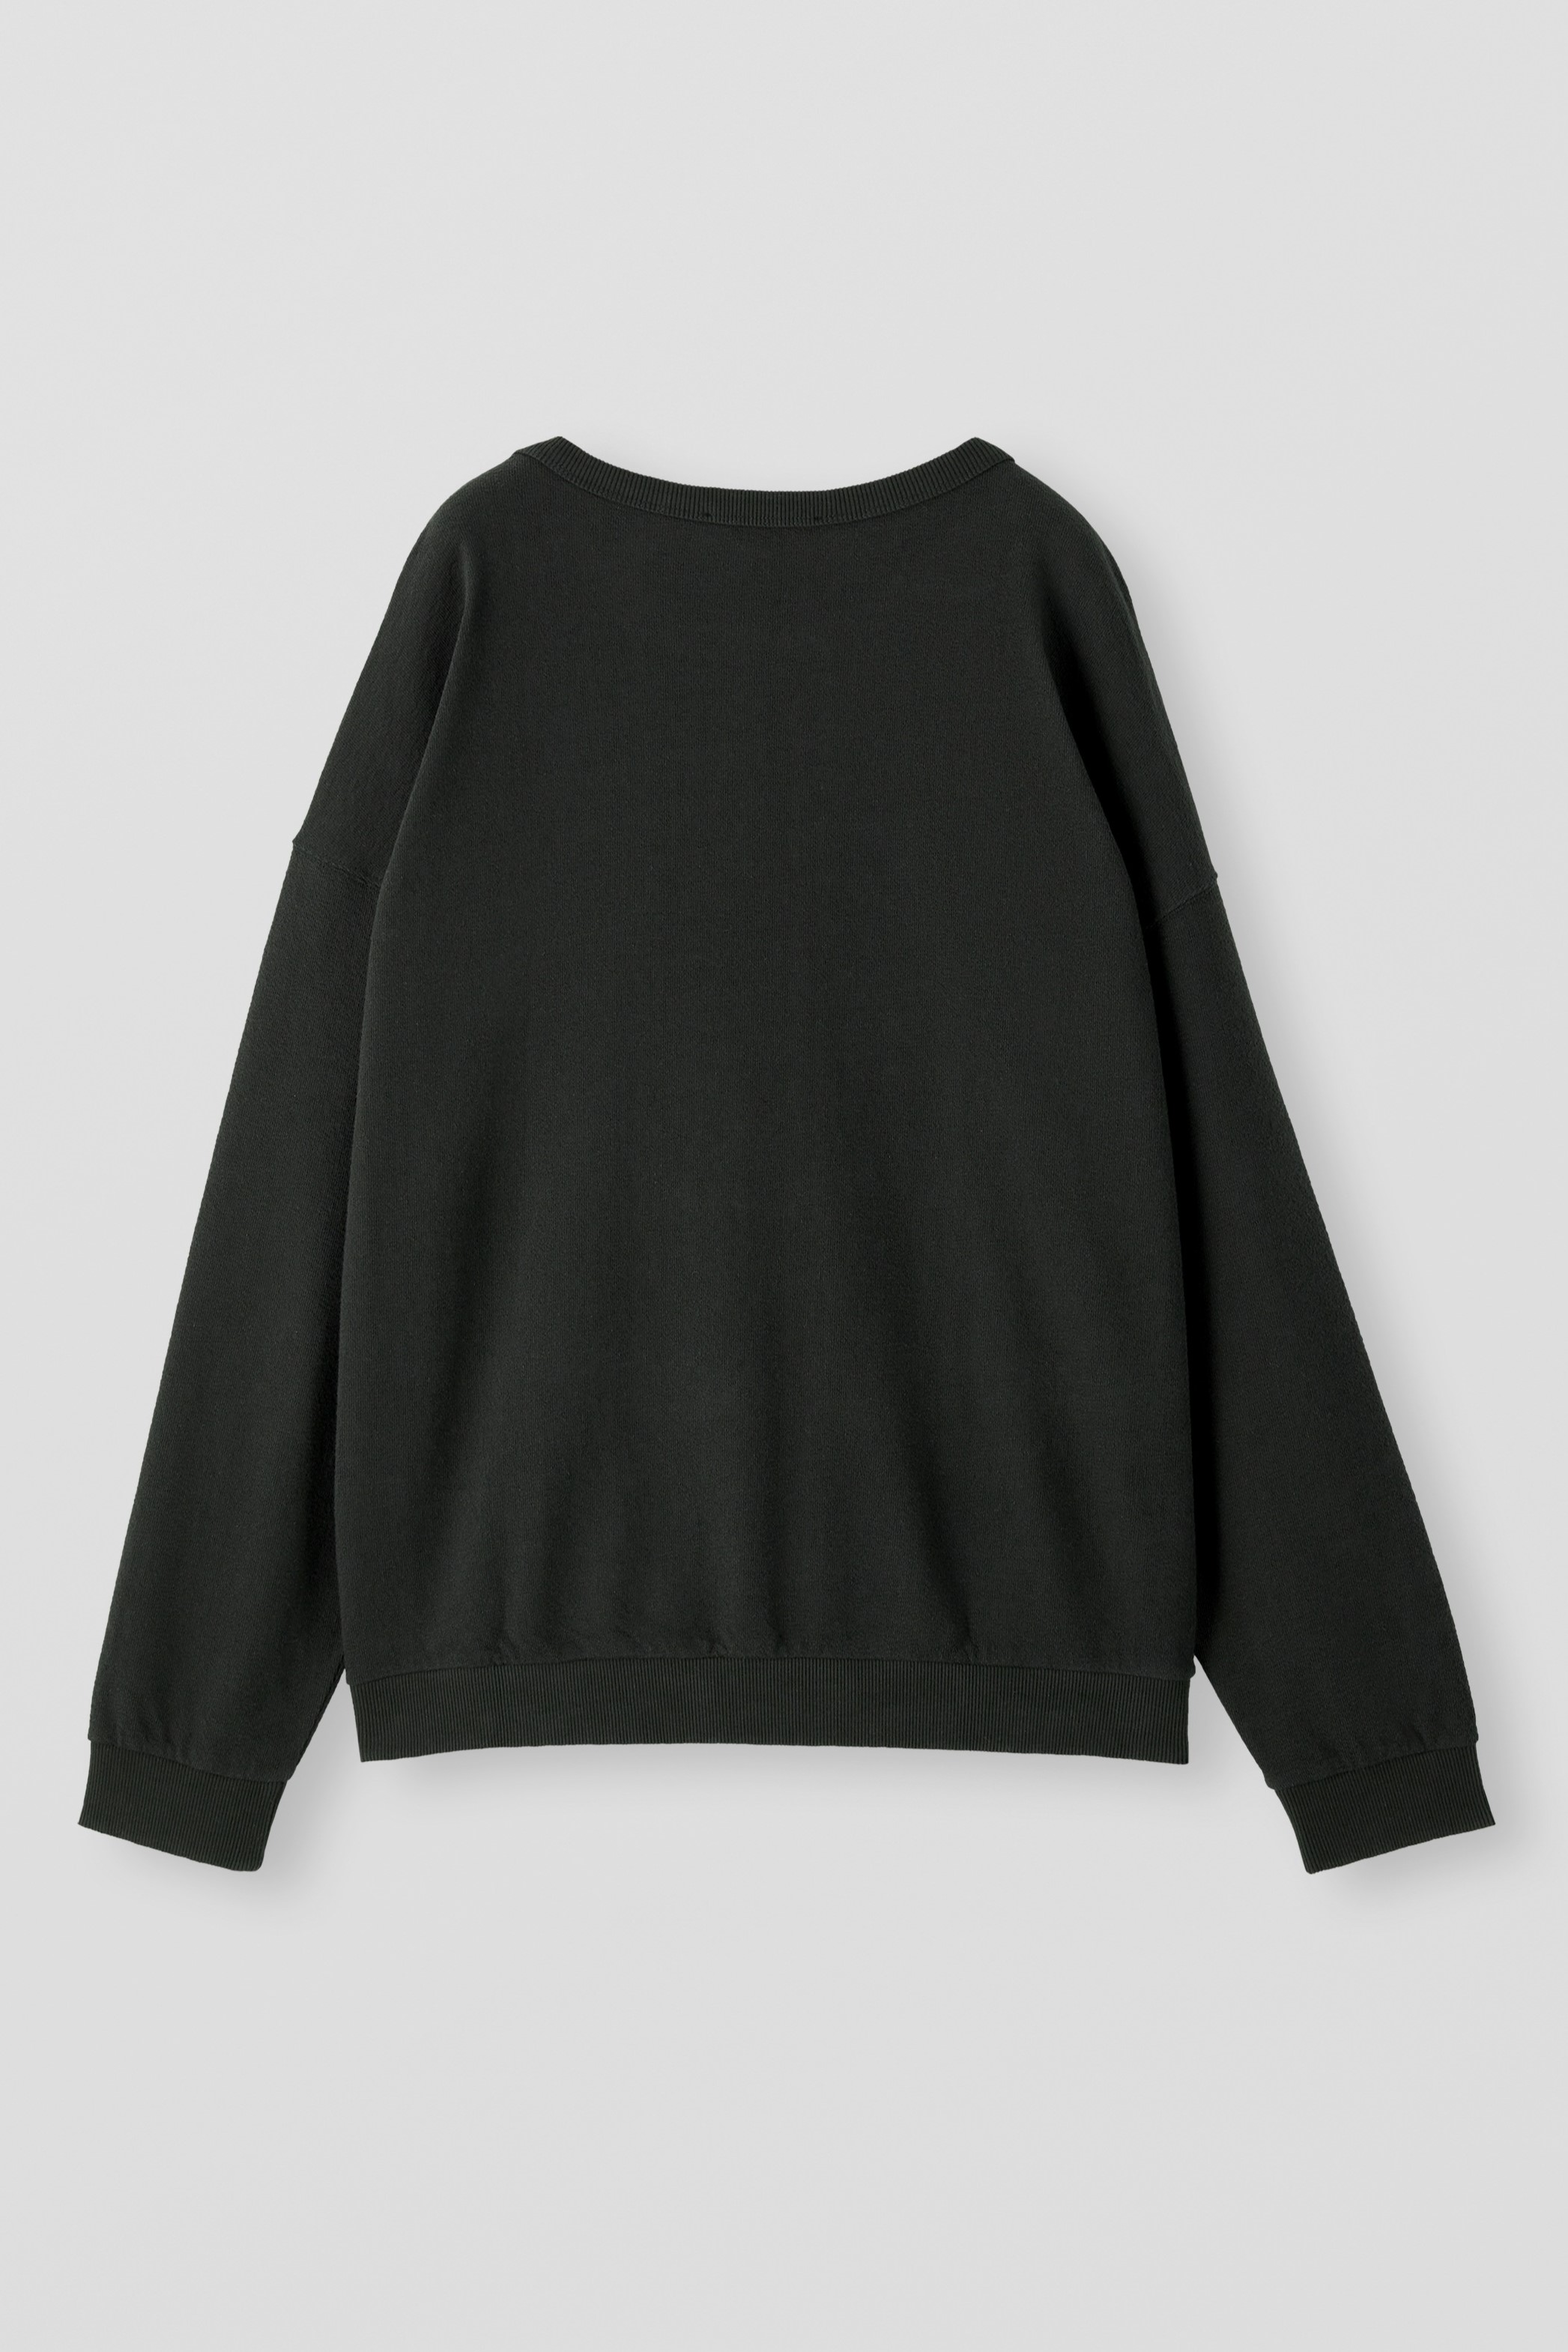 APPLIED ART FORMS Structure Sweater in Charcoal